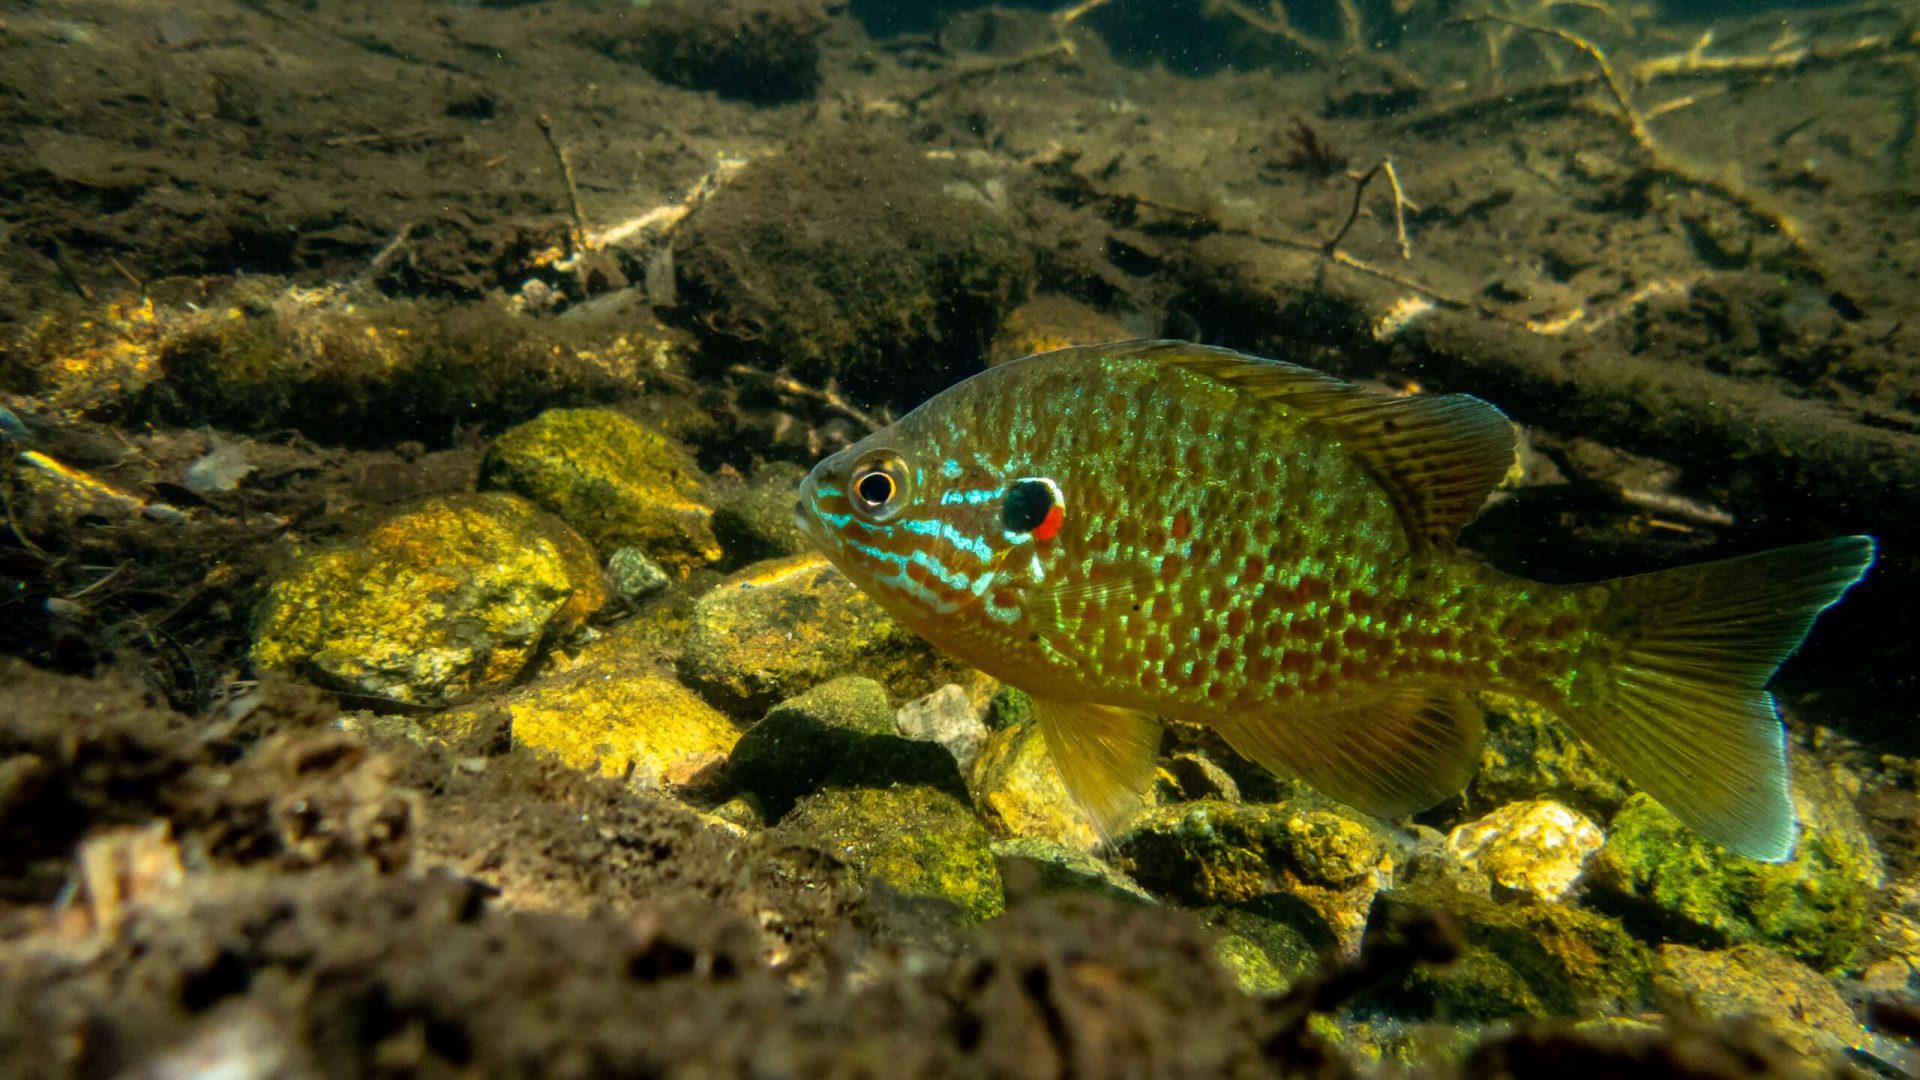 Colorful fish swimming in a rocky underwater environment.